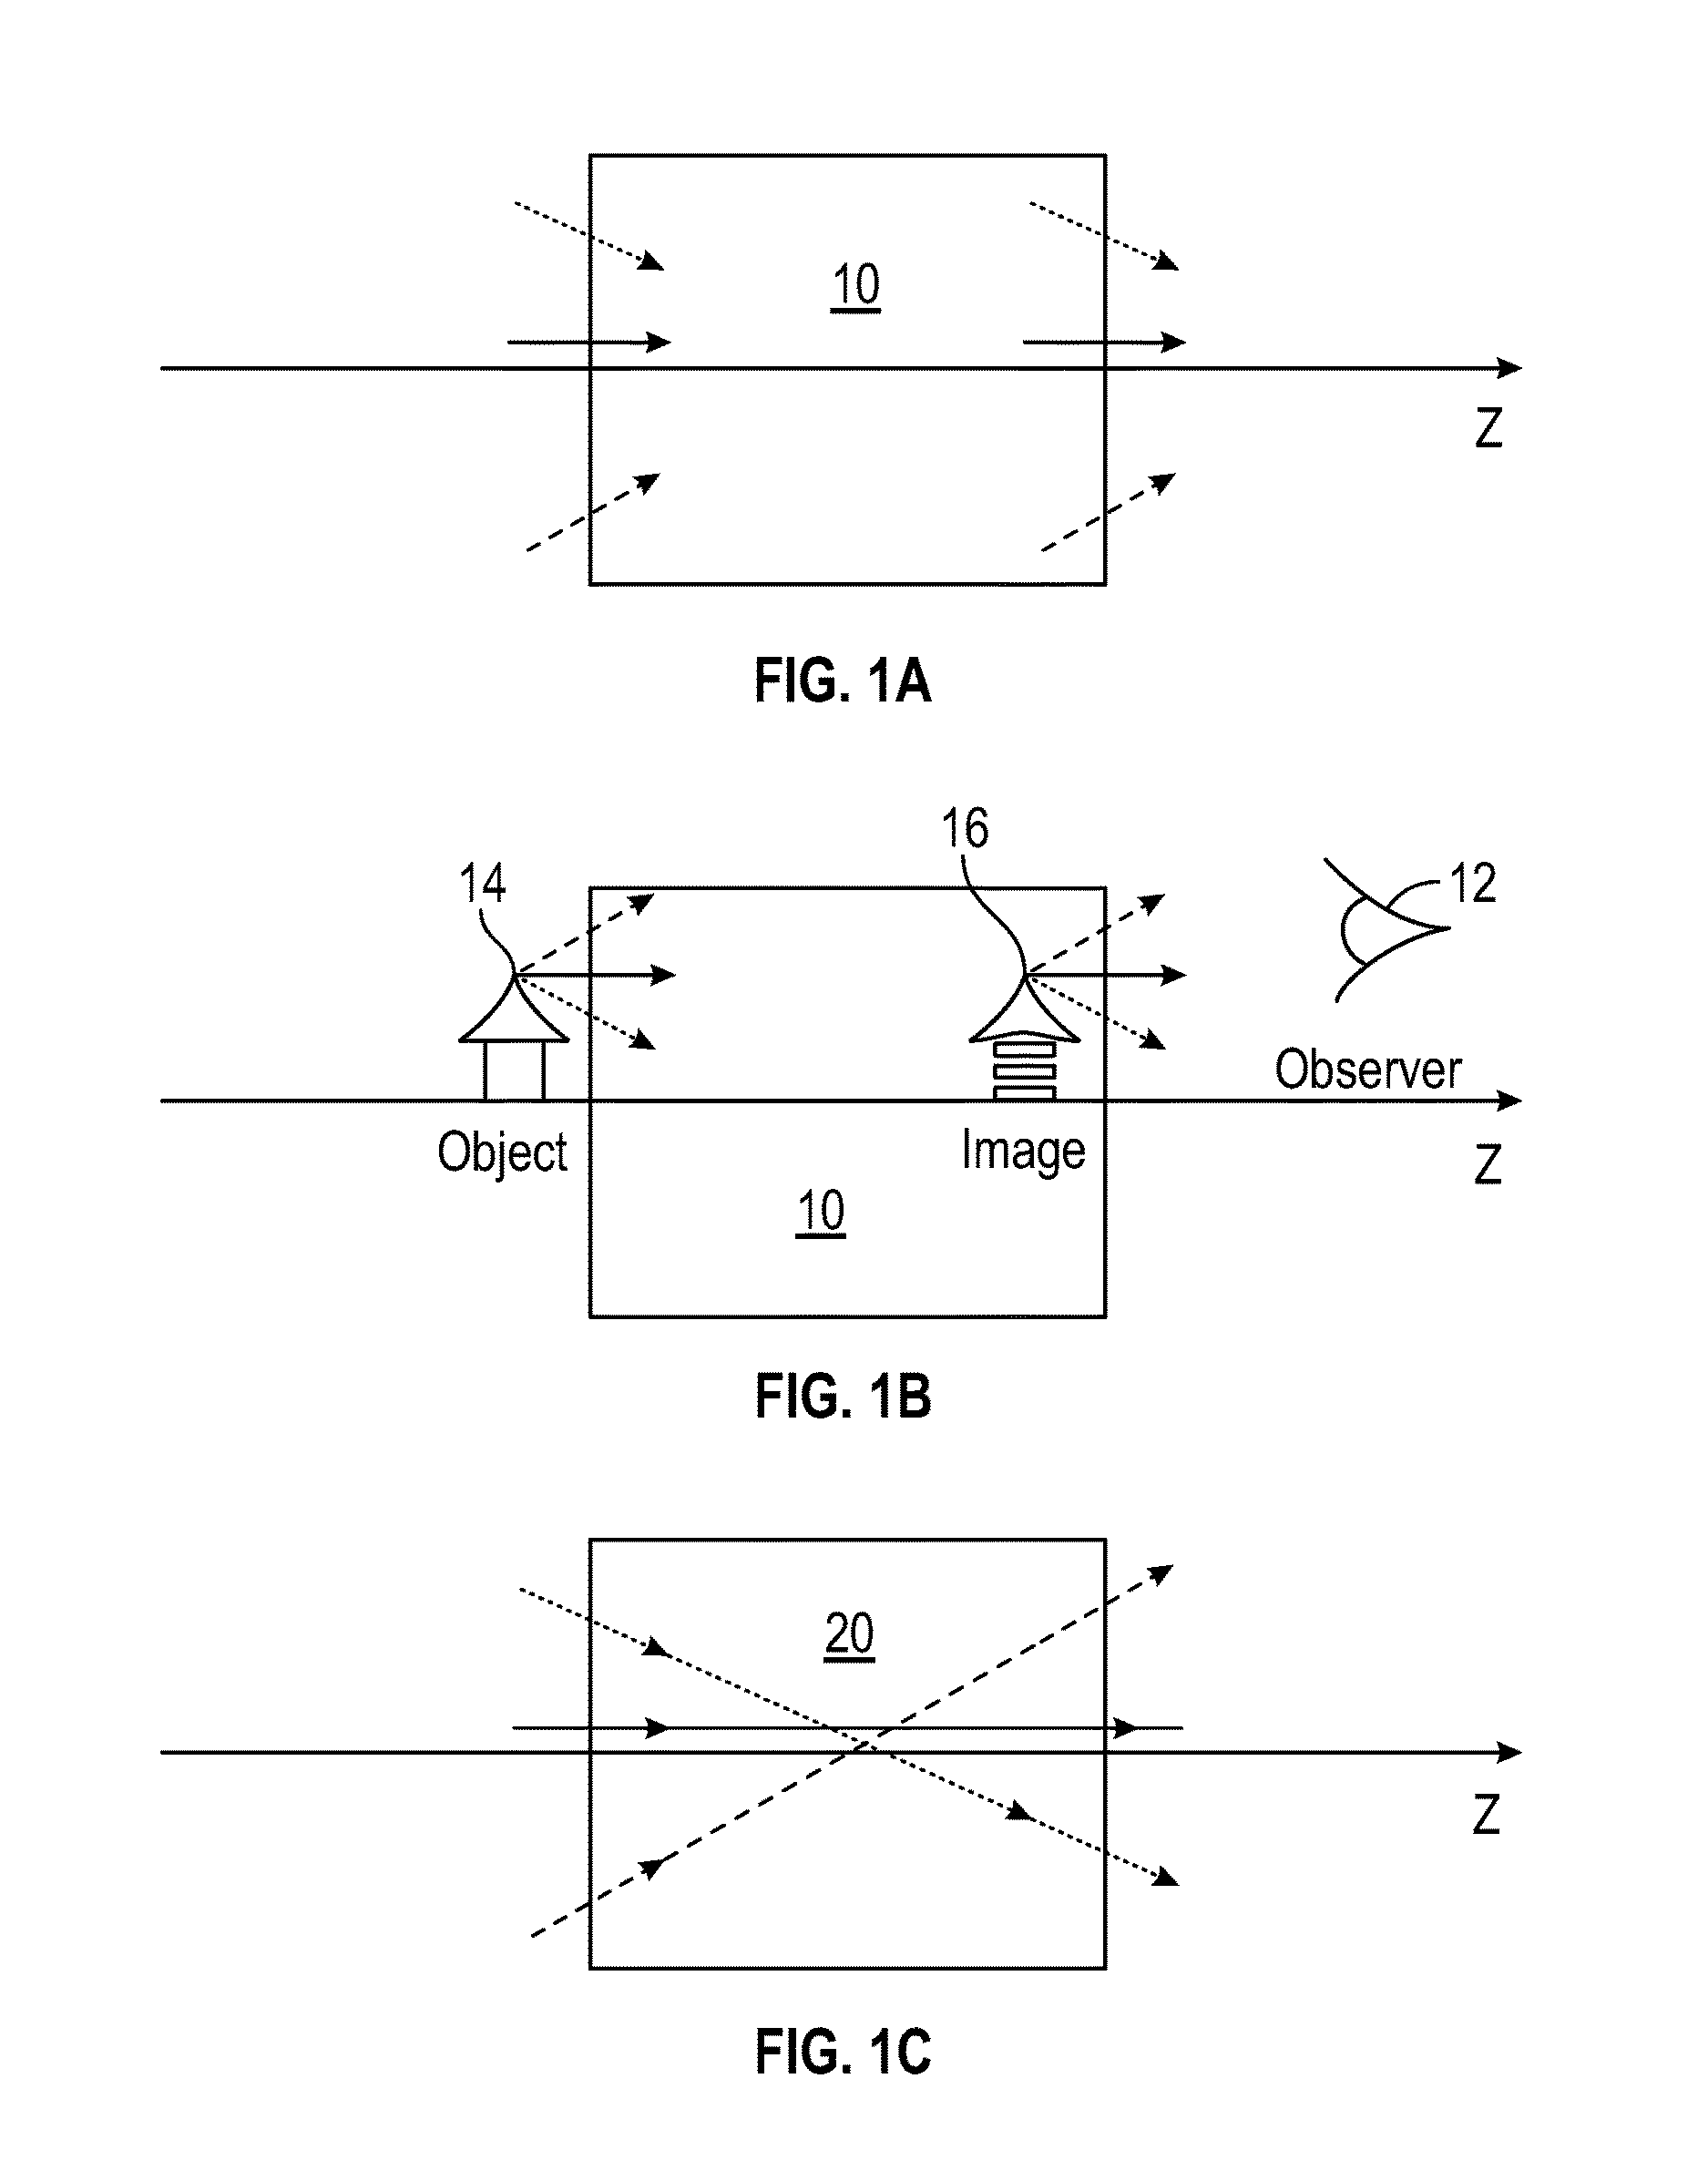 Paraxial cloak design and device